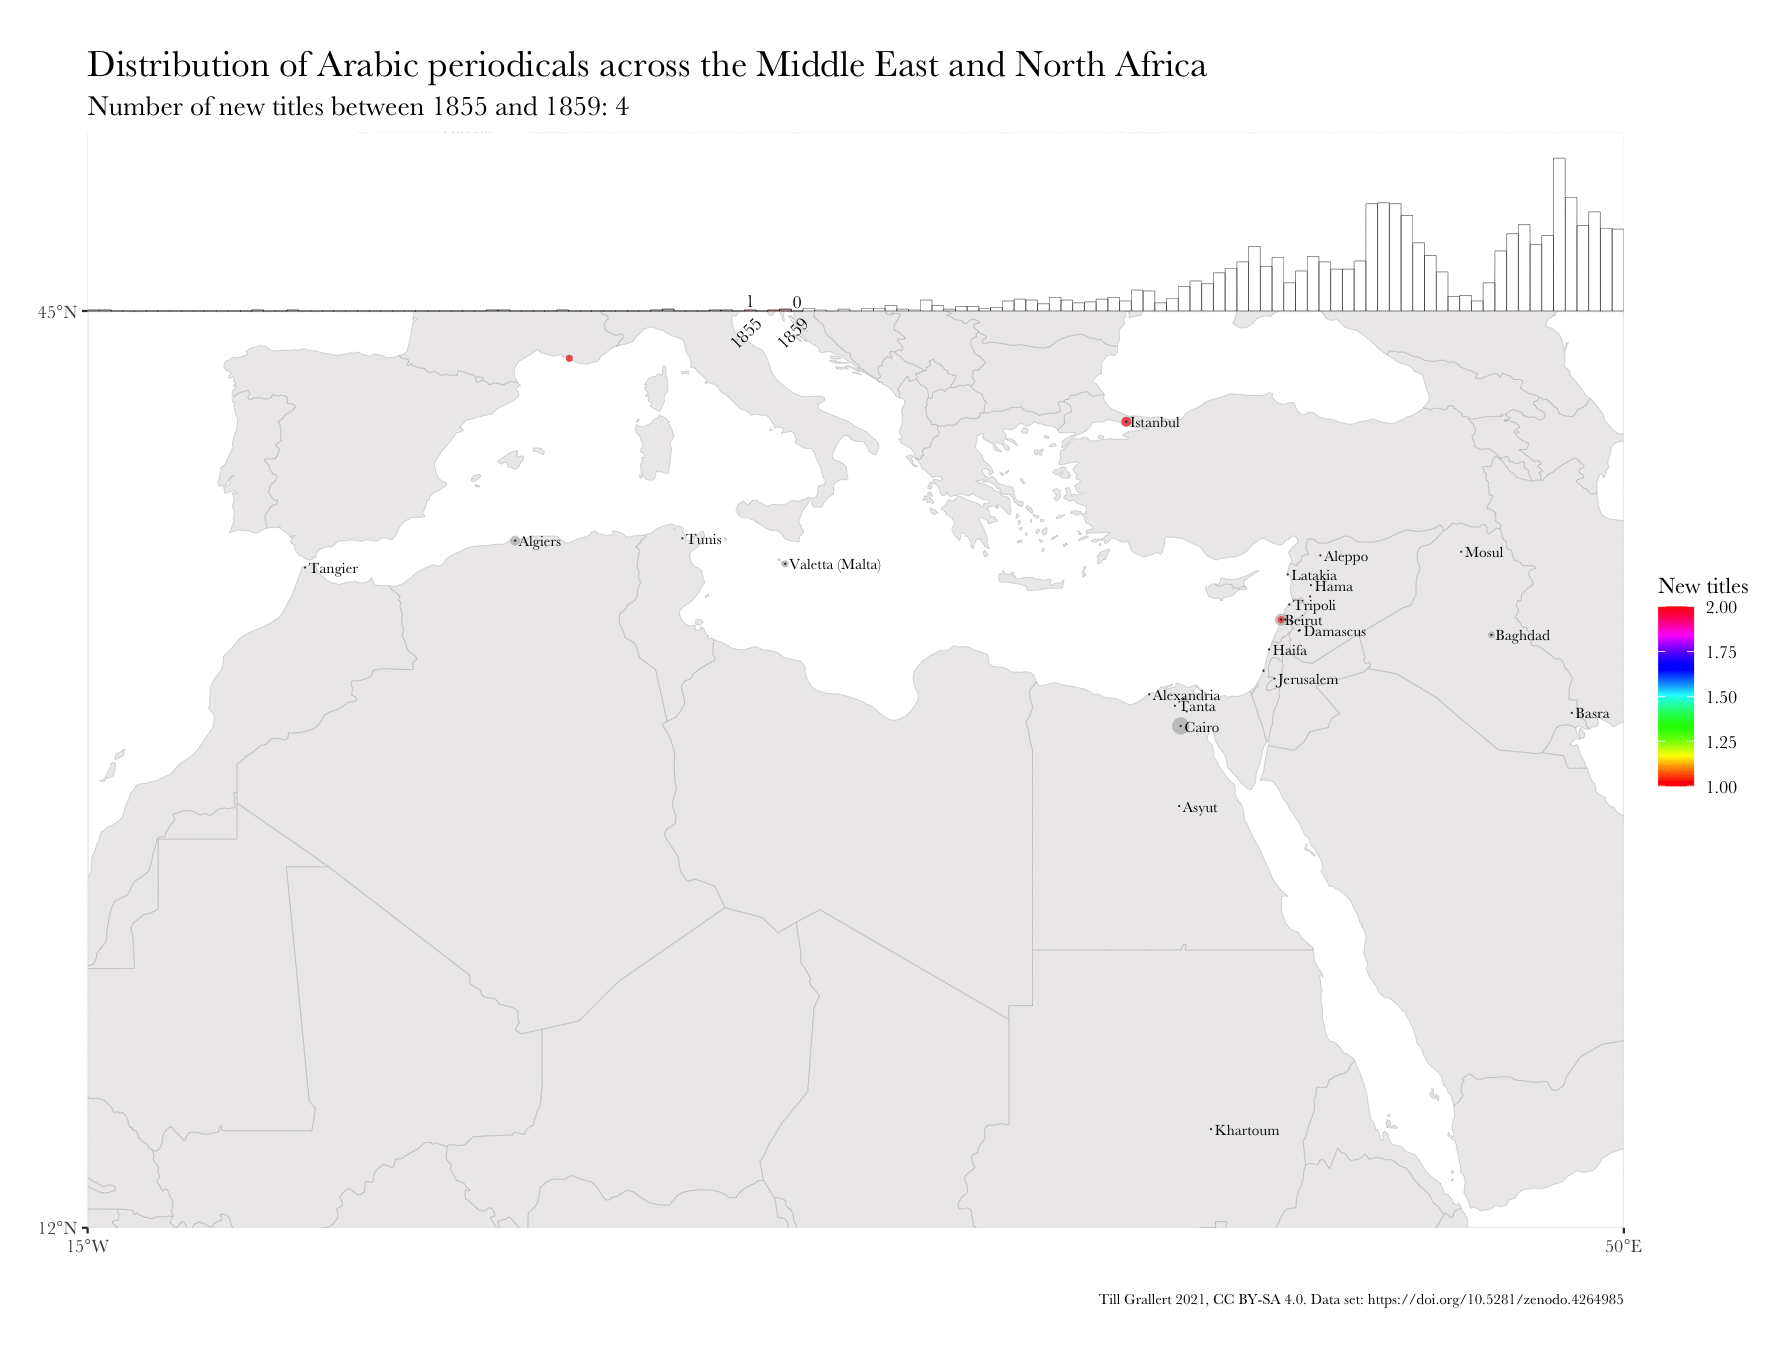 Distribution of Arabic Periodicals Per Every Five Years, 1800-1929